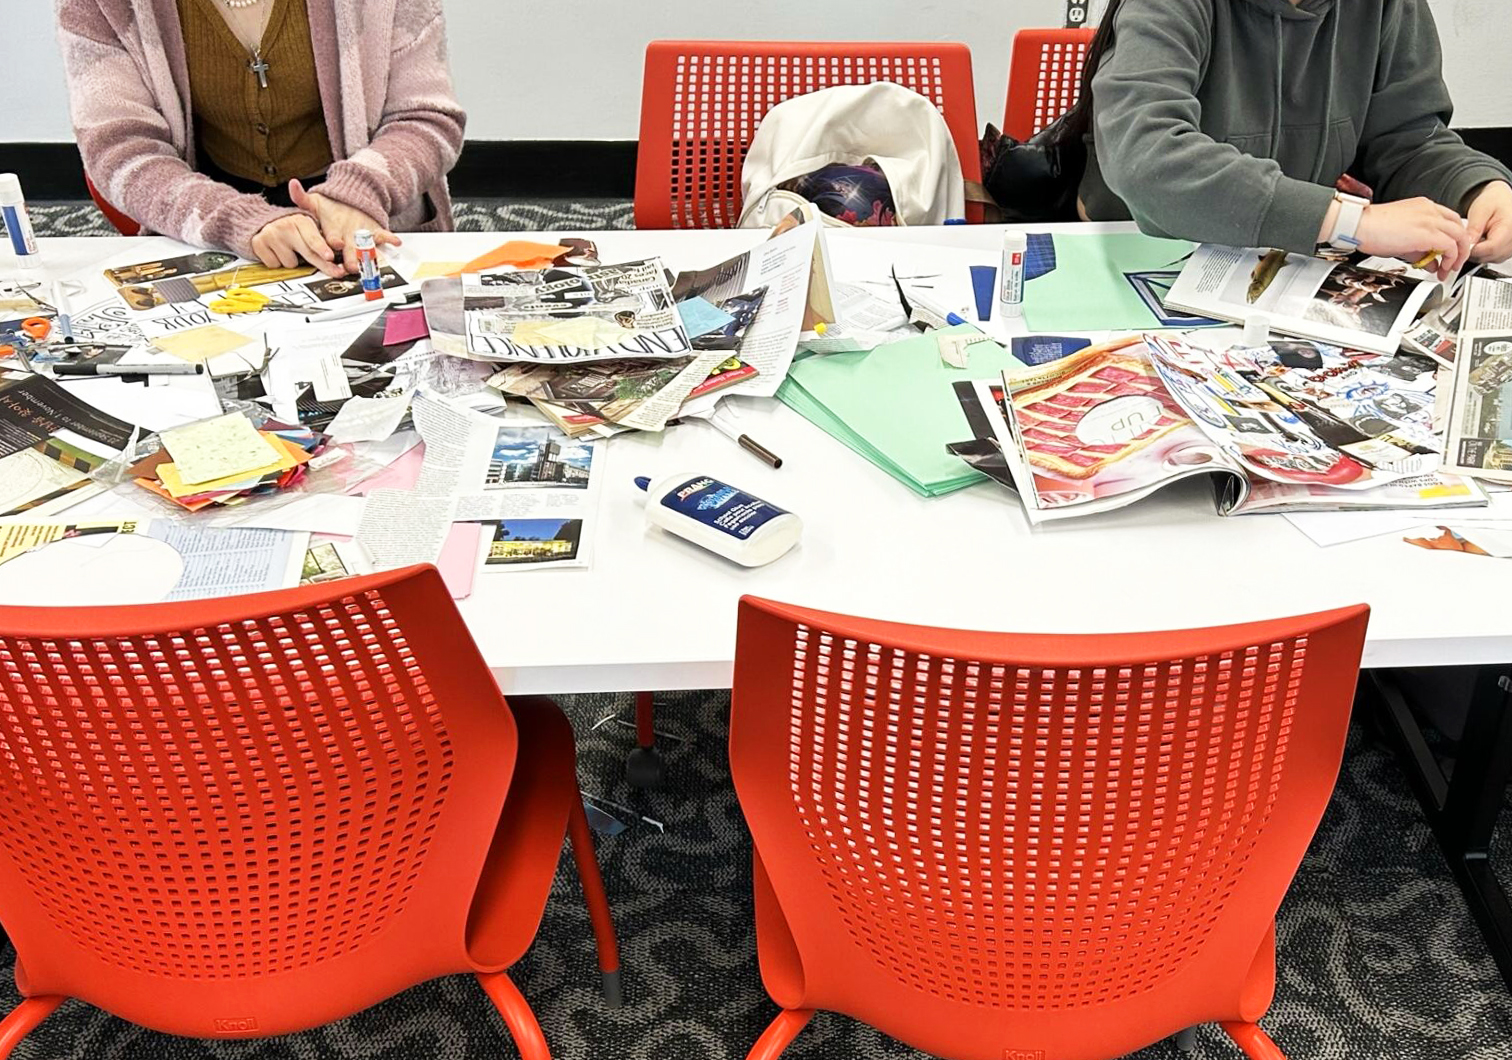 Two students are cutting images out of magazines to make a collage.